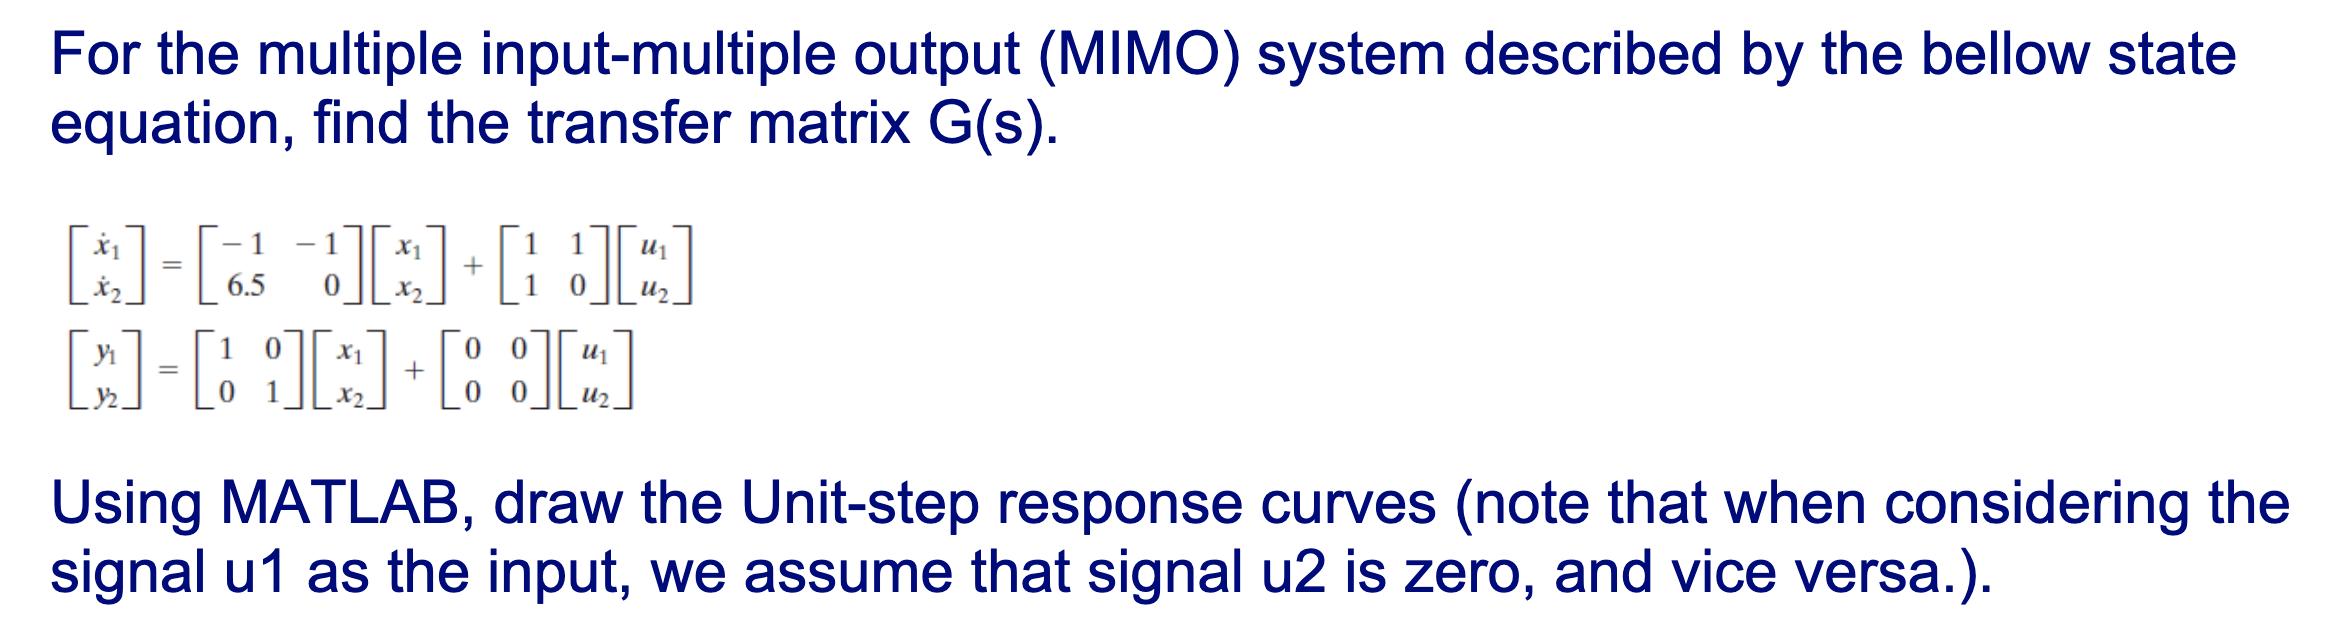 For the multiple input-multiple output (MIMO) system described by the bellow state equation, find the